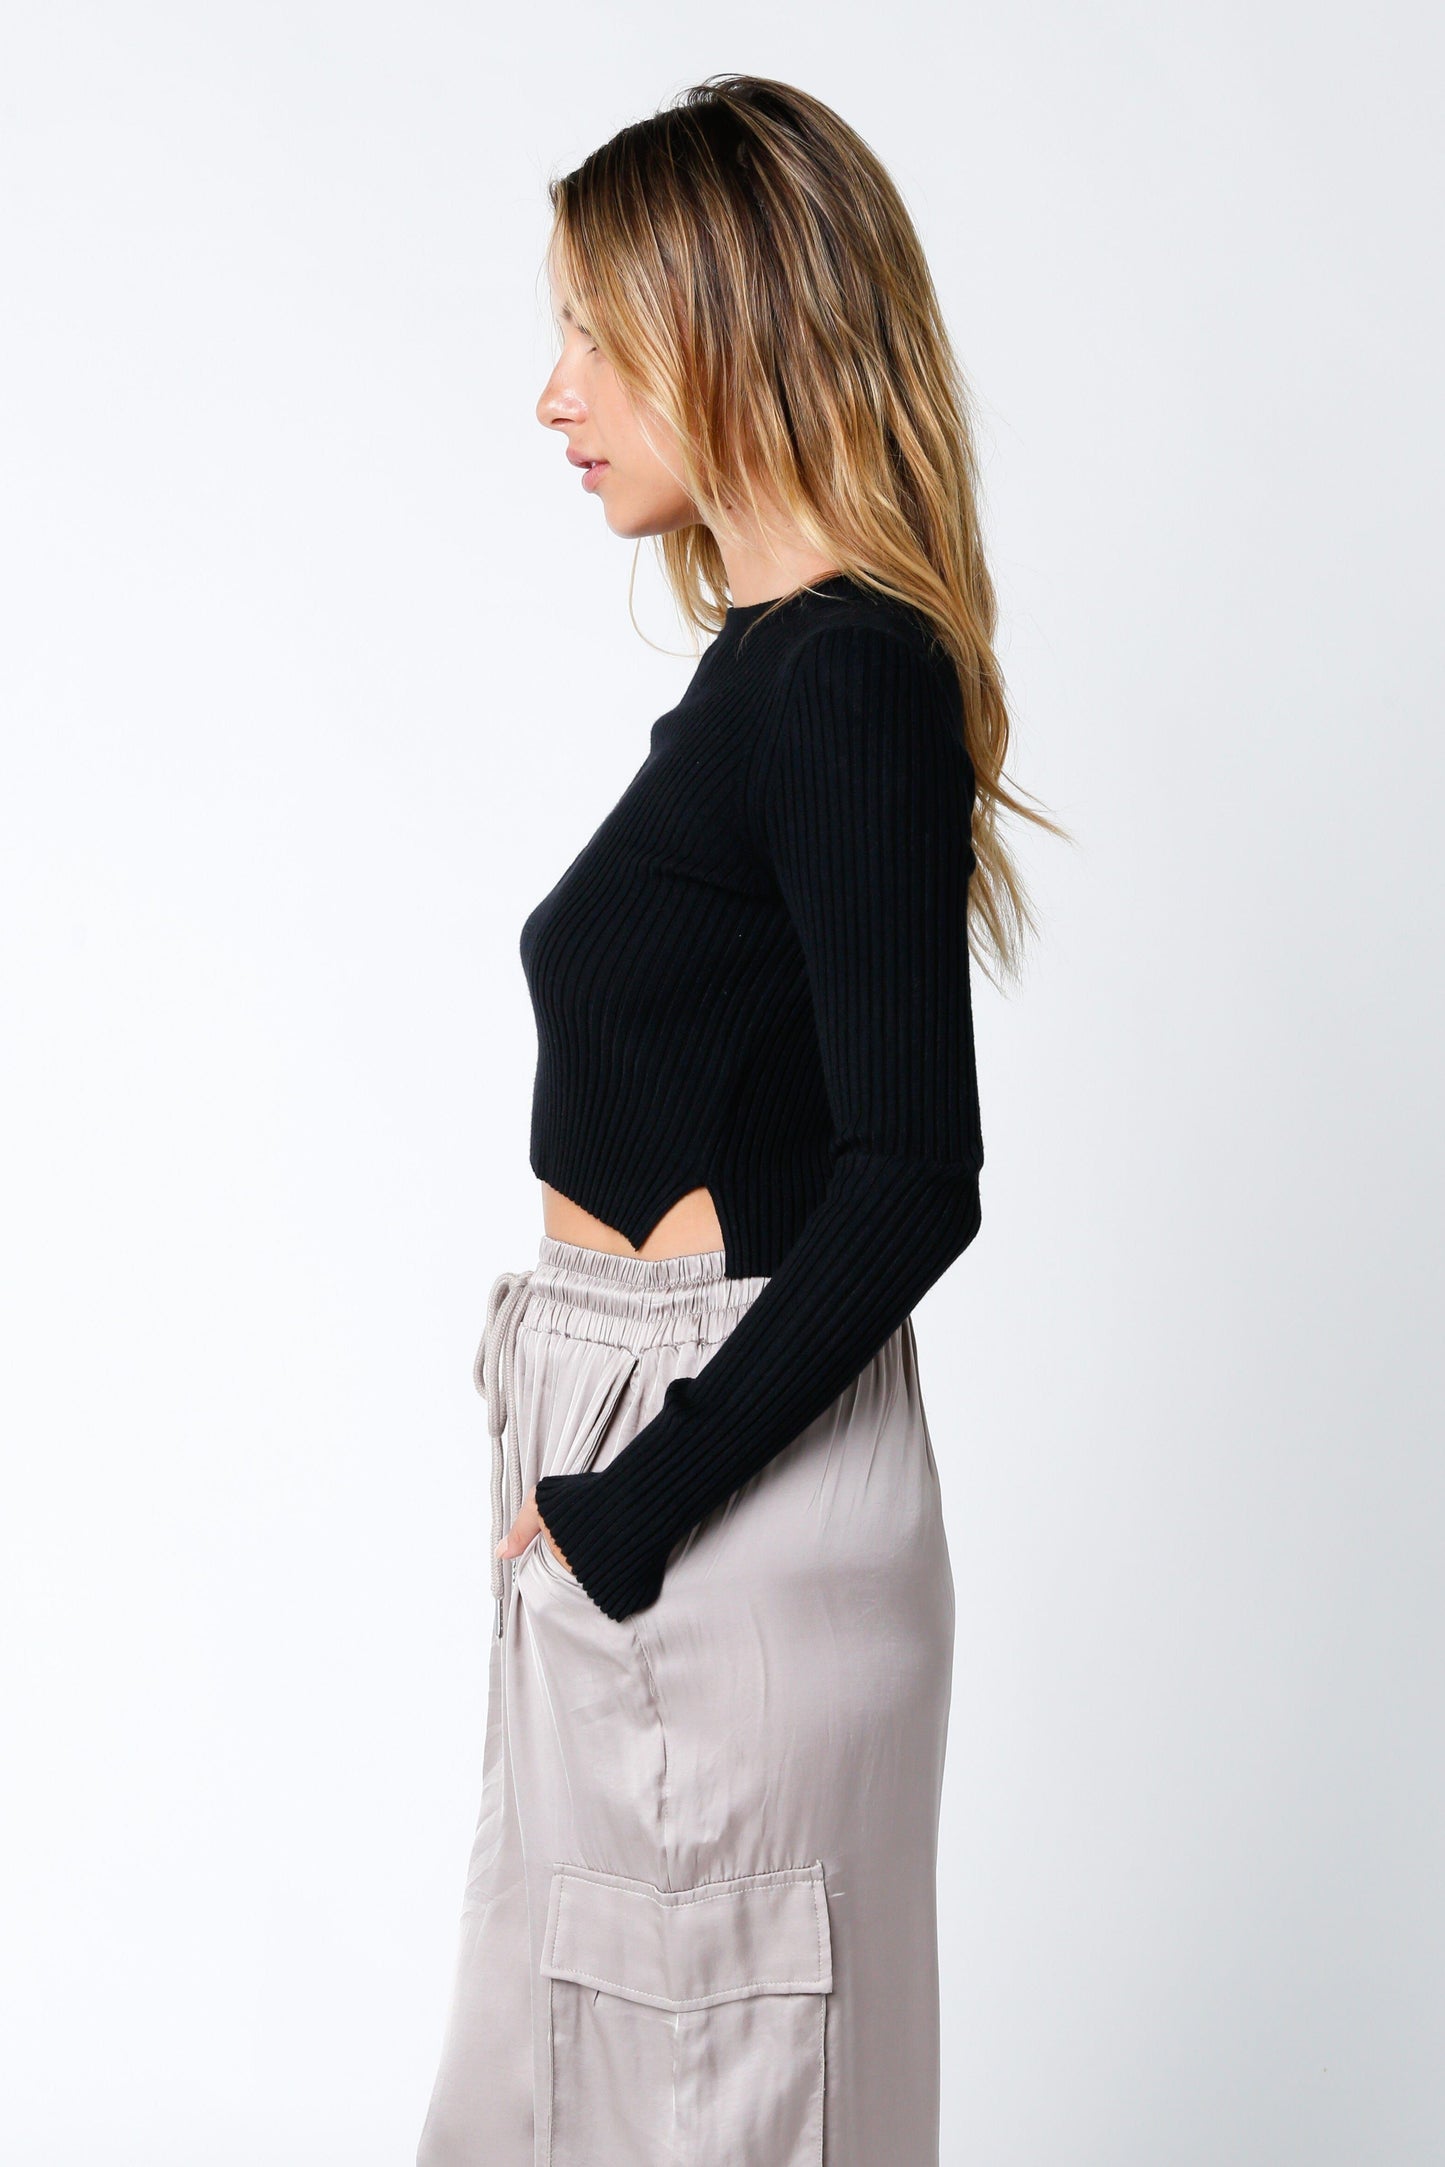 Olivaceous Olivaceous Kendra Crop Sweater - Mocha